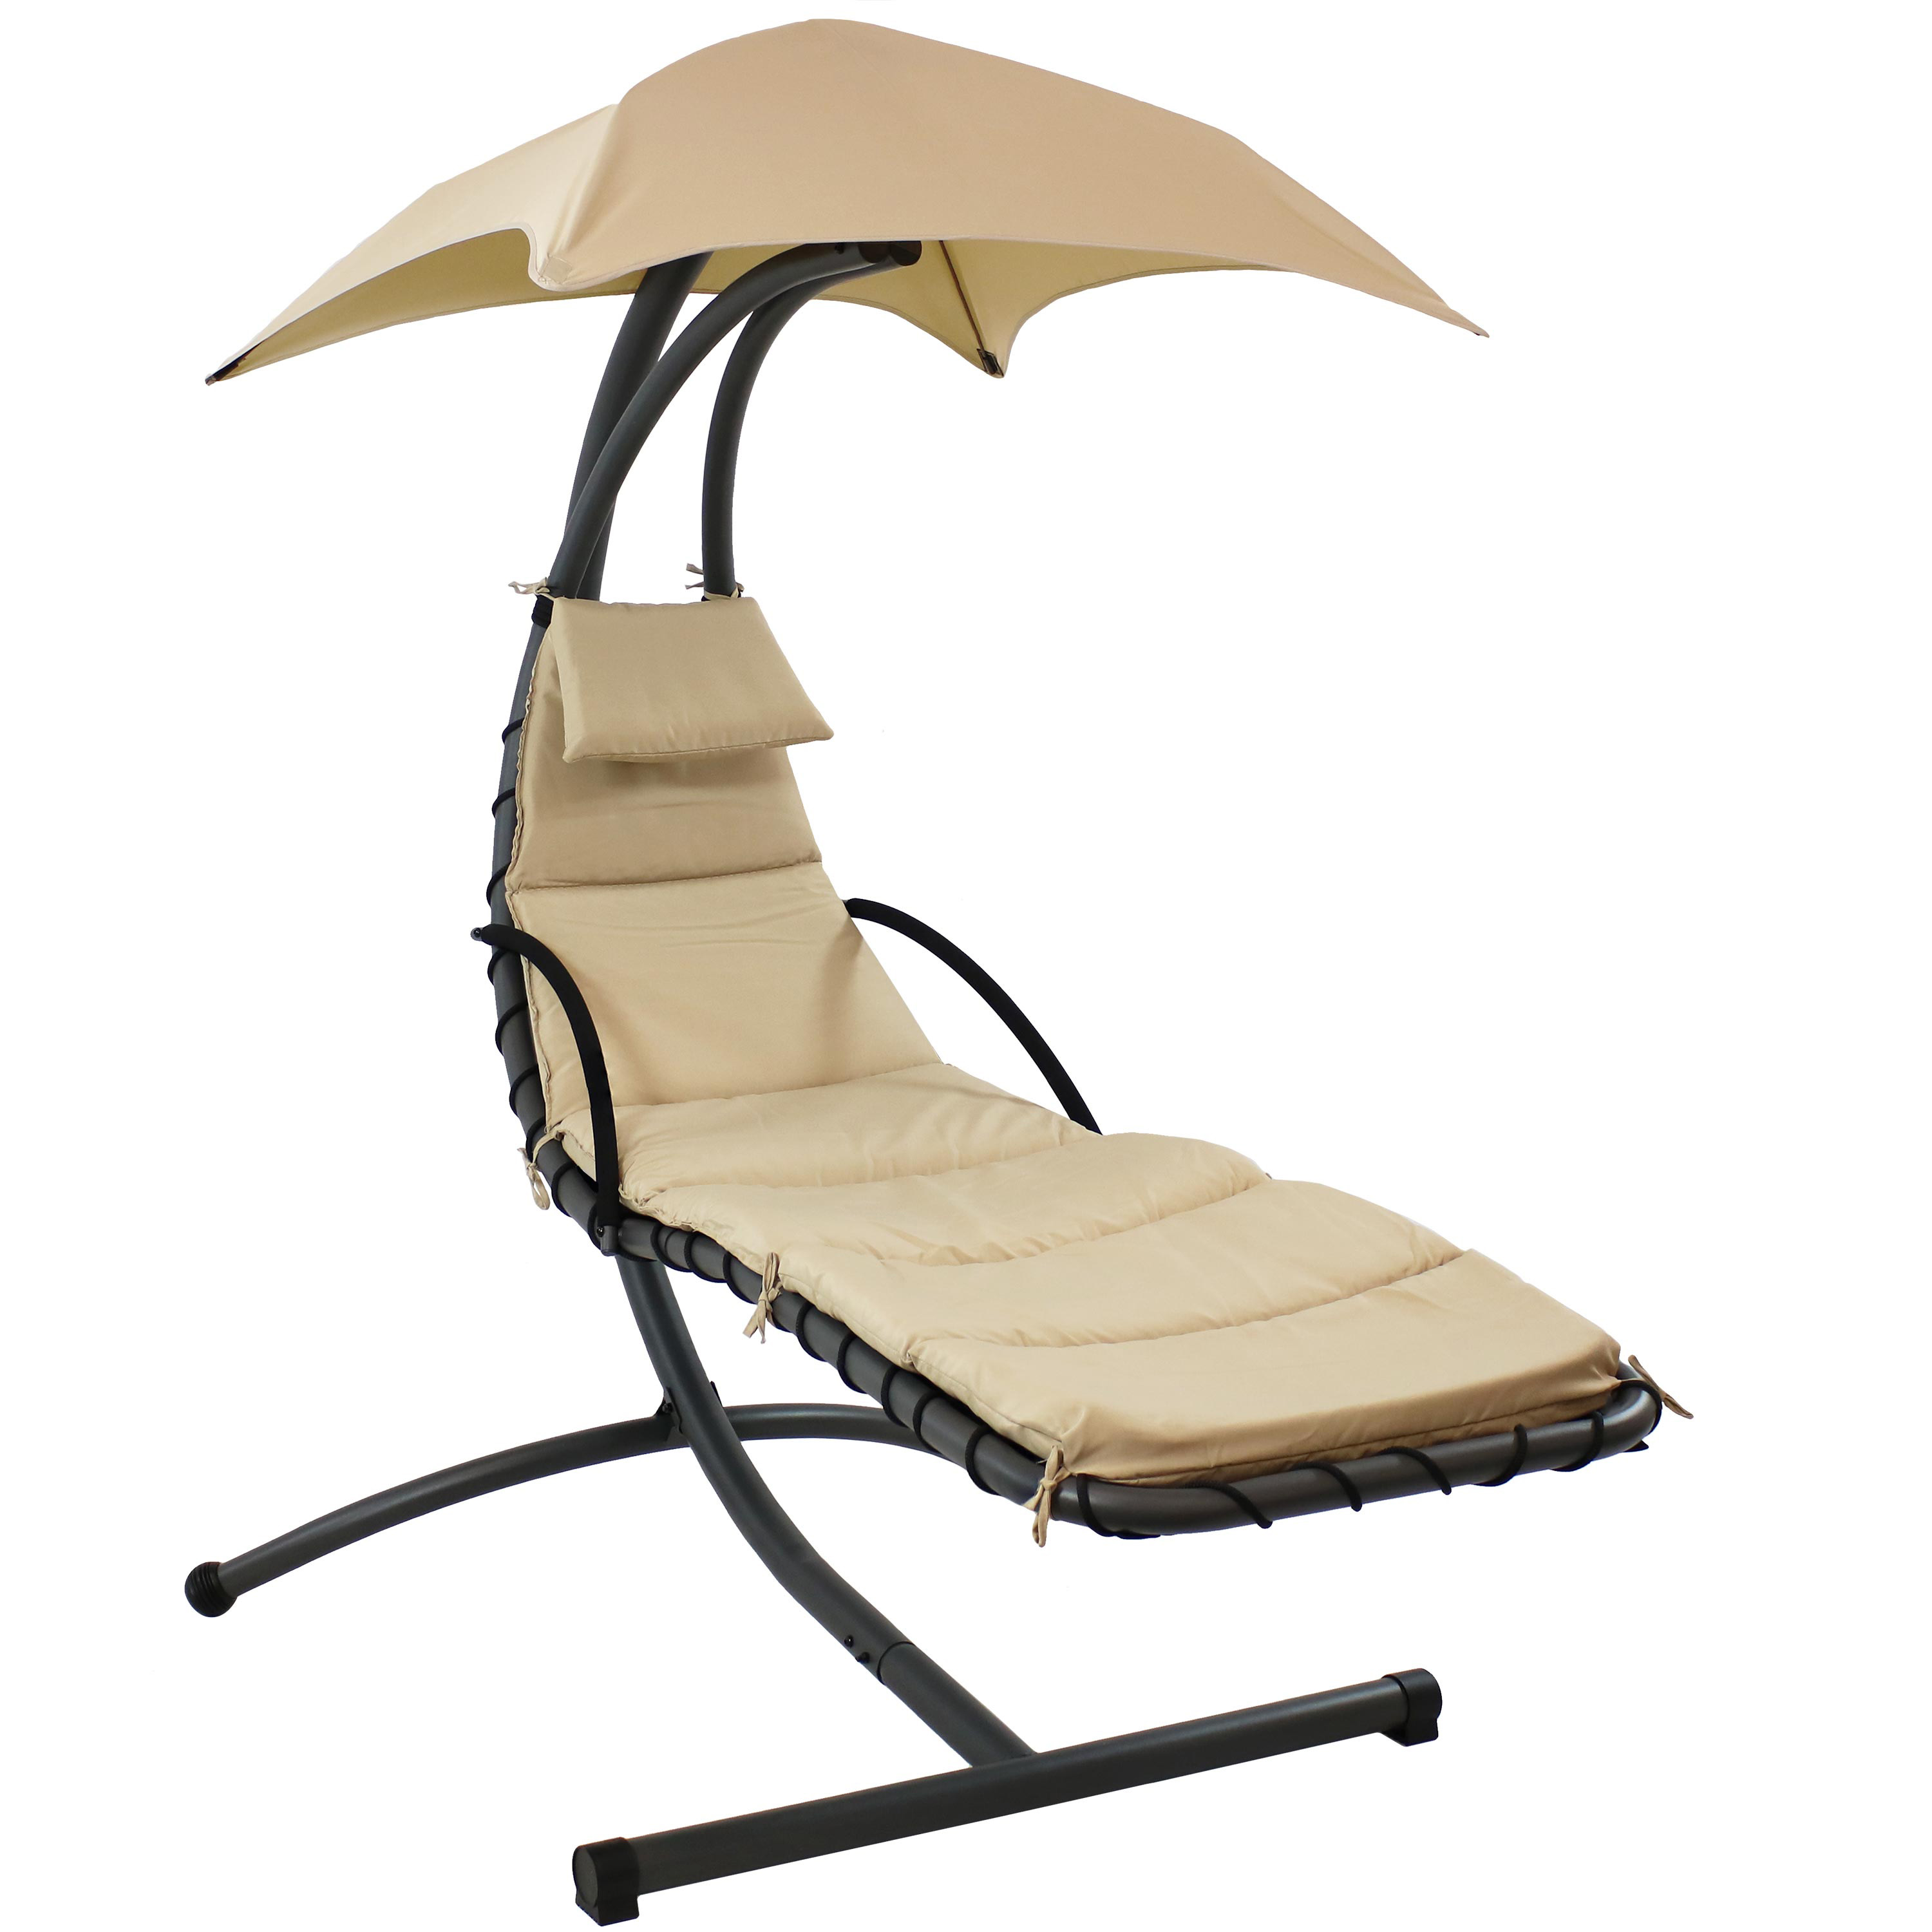 Sunnydaze Floating Chaise Lounge Chair, 260 Pound Capacity, Beige